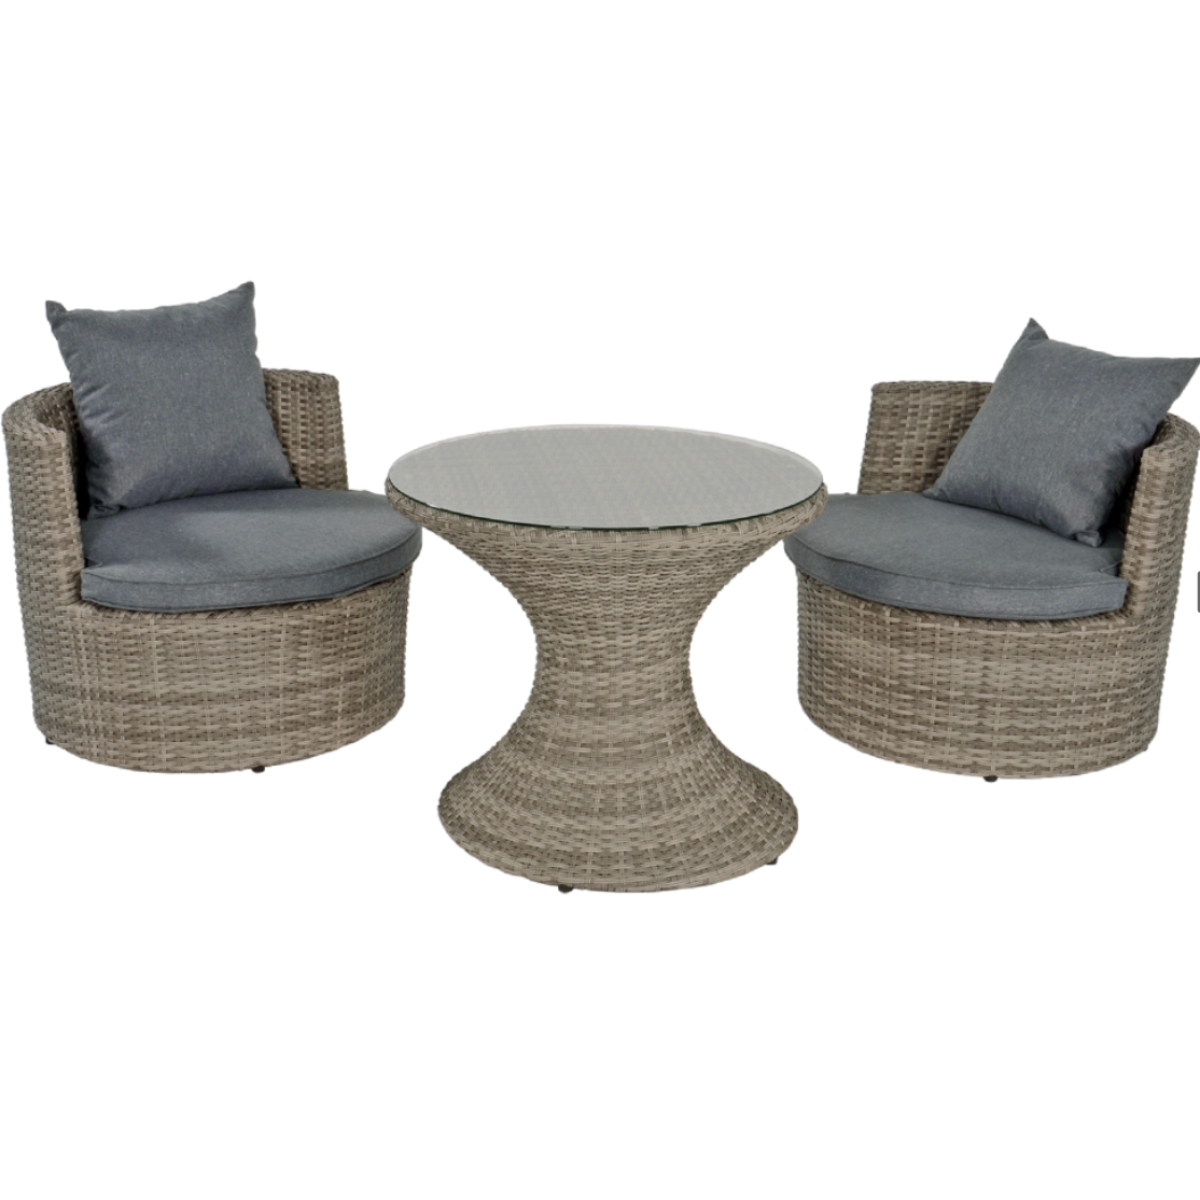 Nancy's Bitoche Lounge Set - Wicker and Aluminum Frame - Gray 